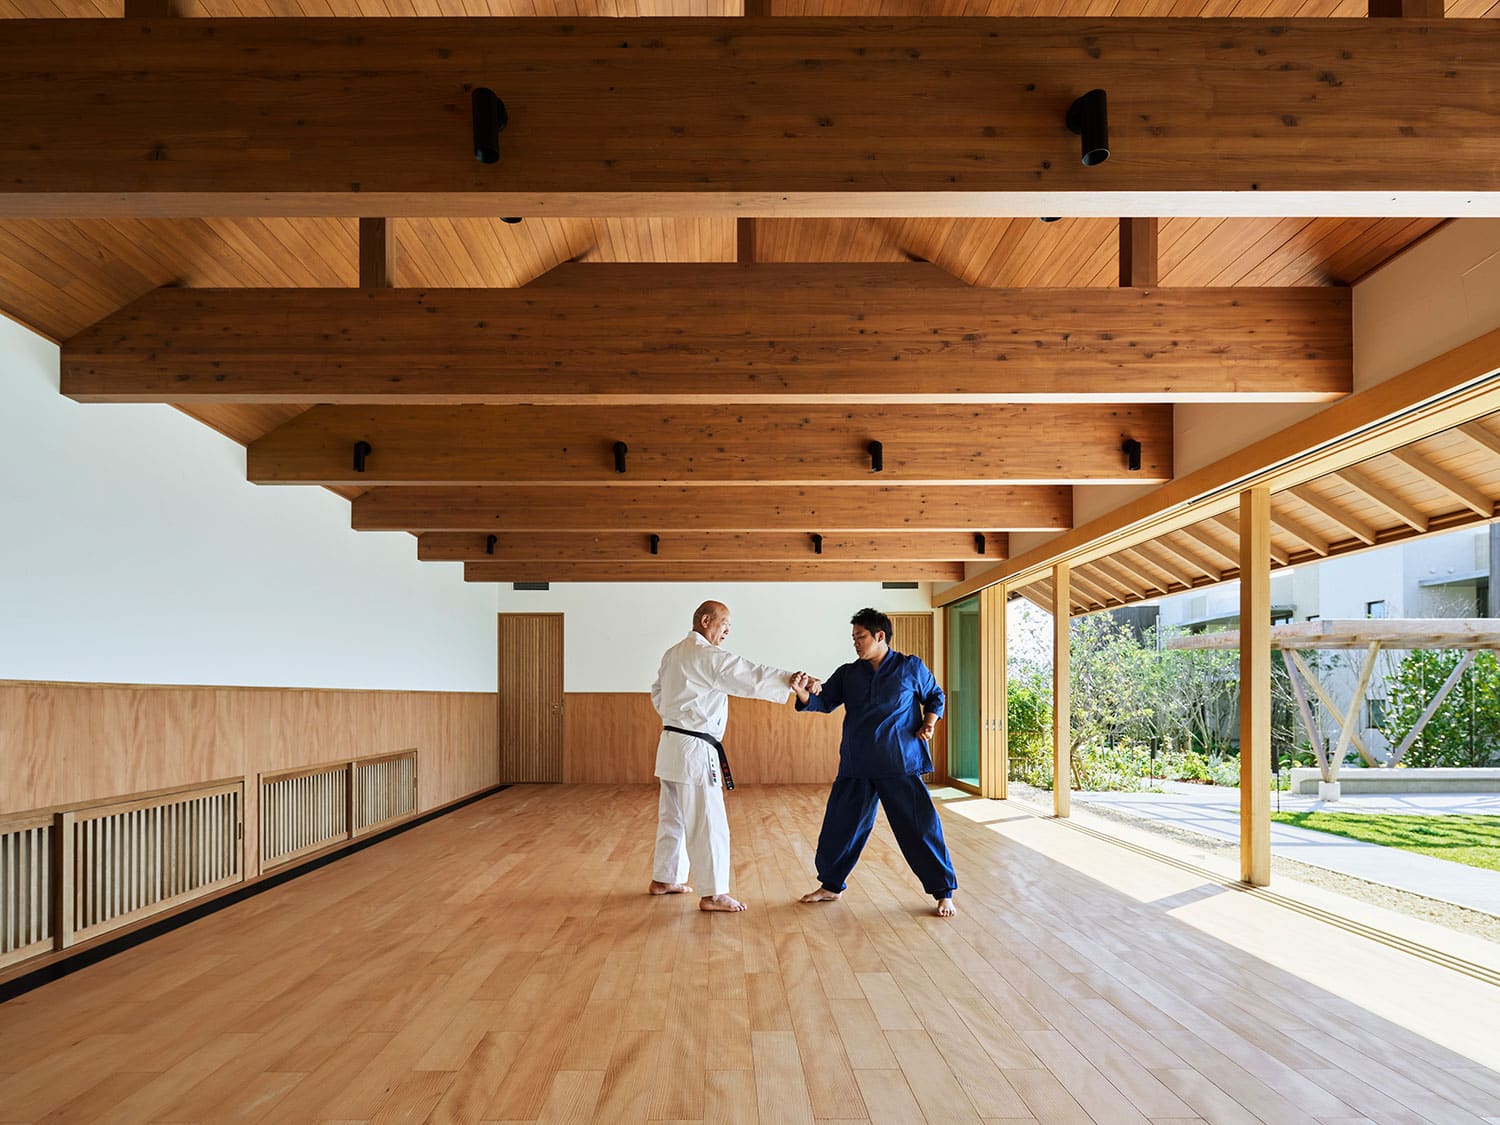 The activity studio at the Hoshinoya Okinawa resort in Japan offers private karate lessons with a local master.